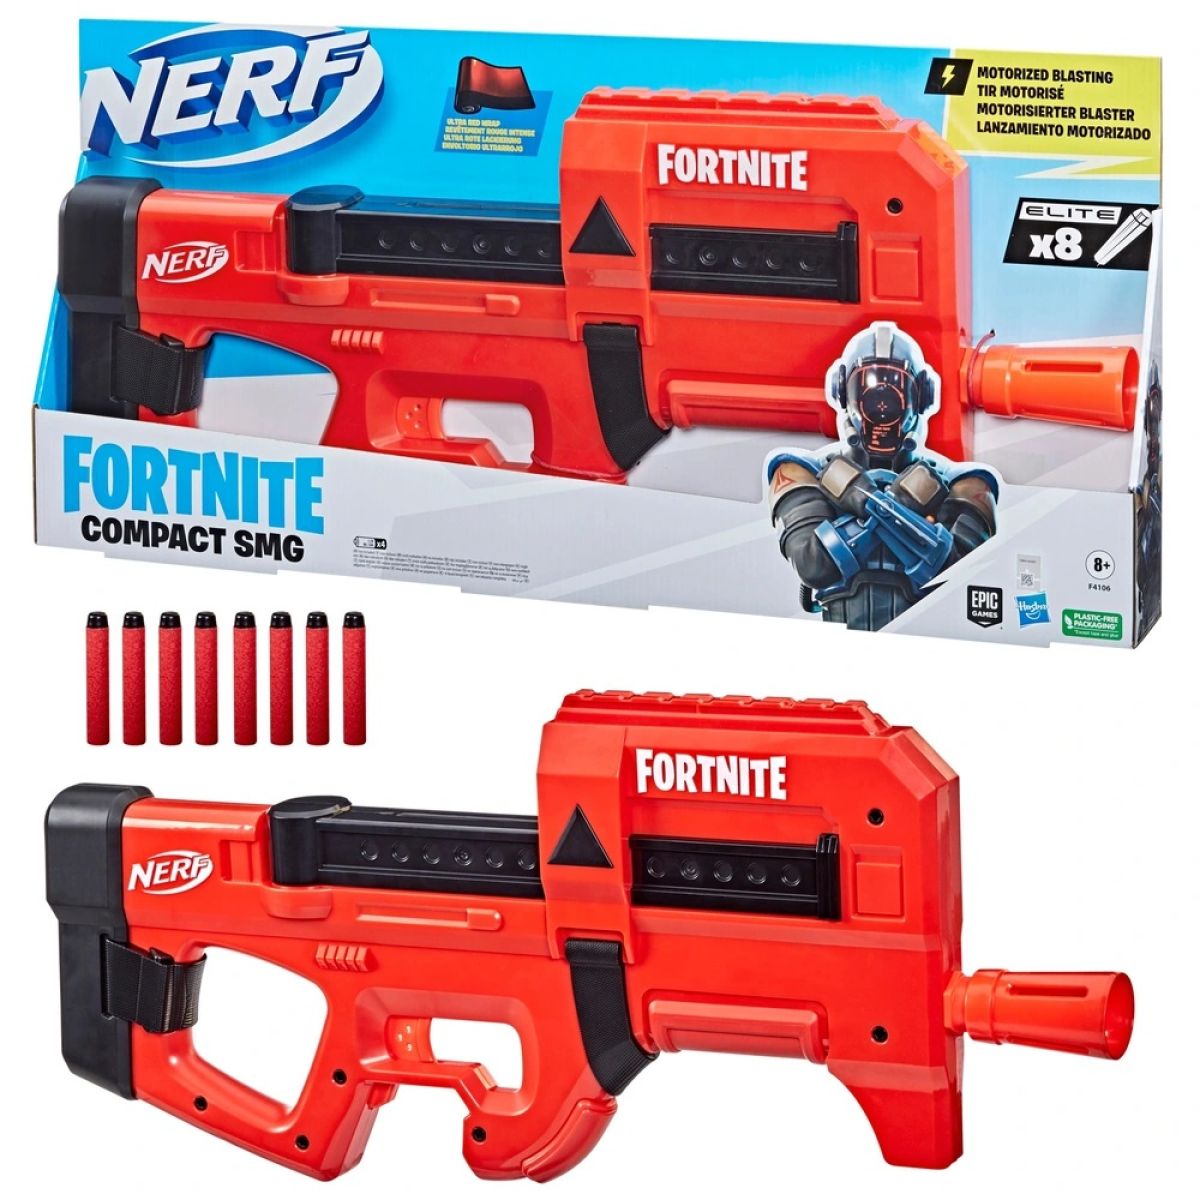 Nerf - Fortnite Compact SMG [::] Let's Play Games